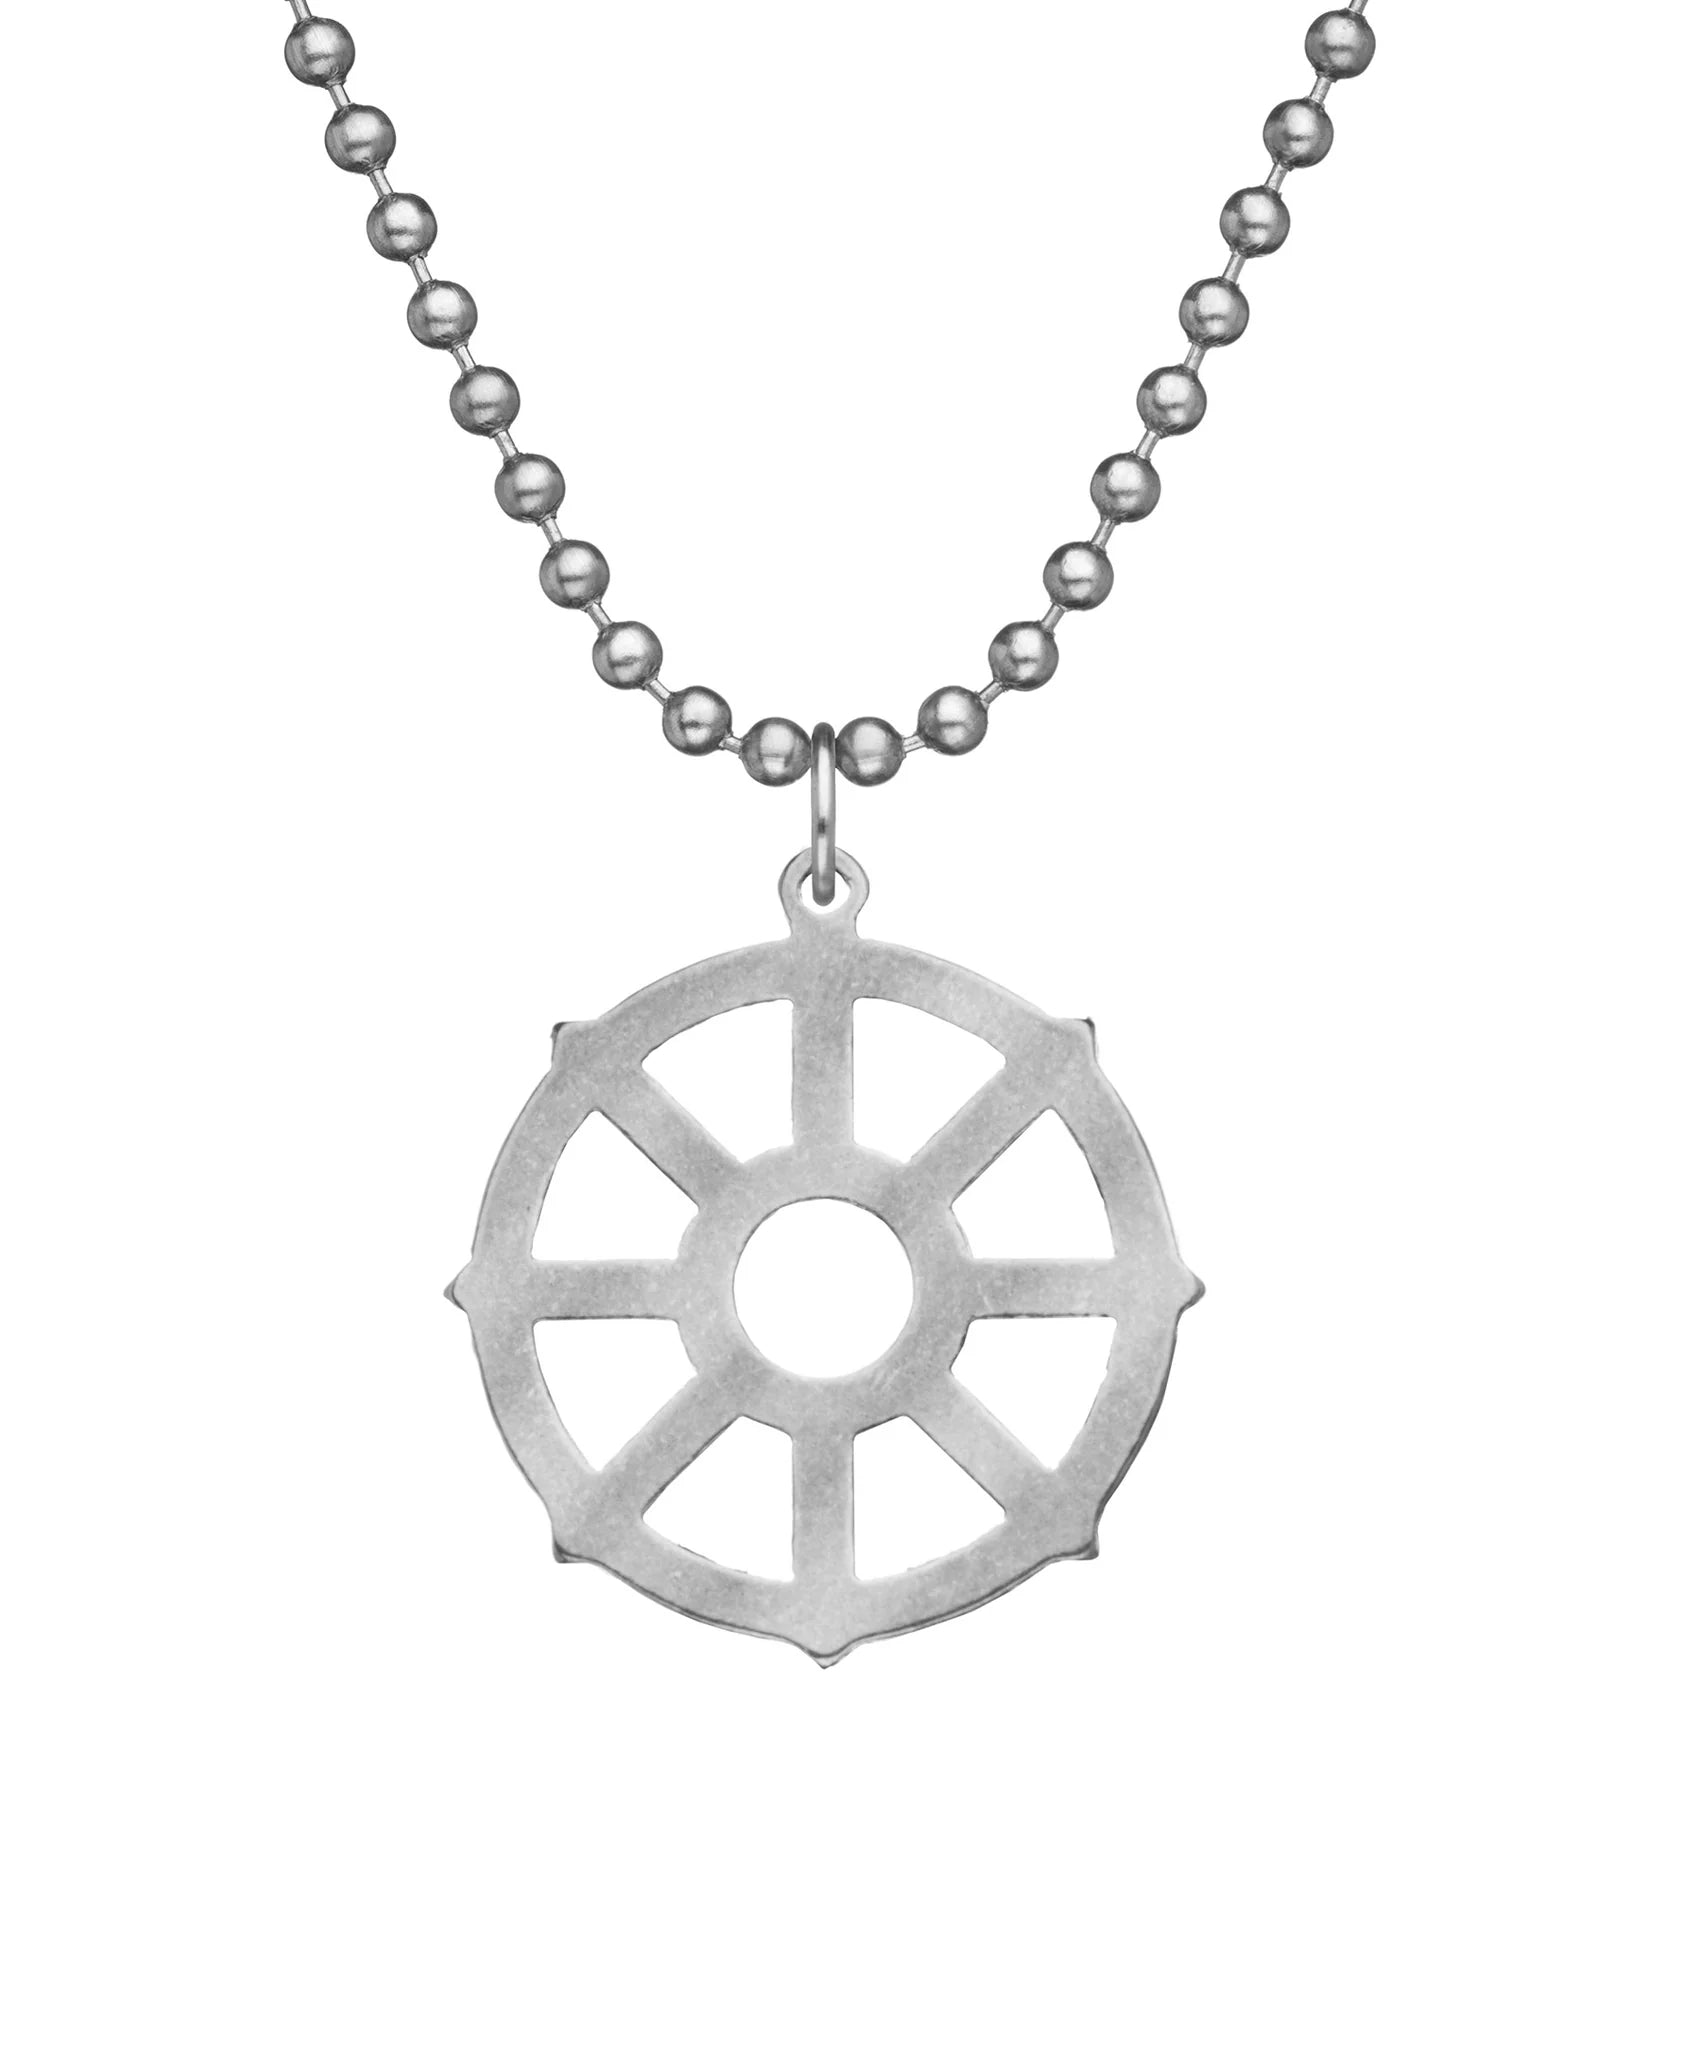 Wheel of Life Necklace with Dog Tag Chain - Military Issue